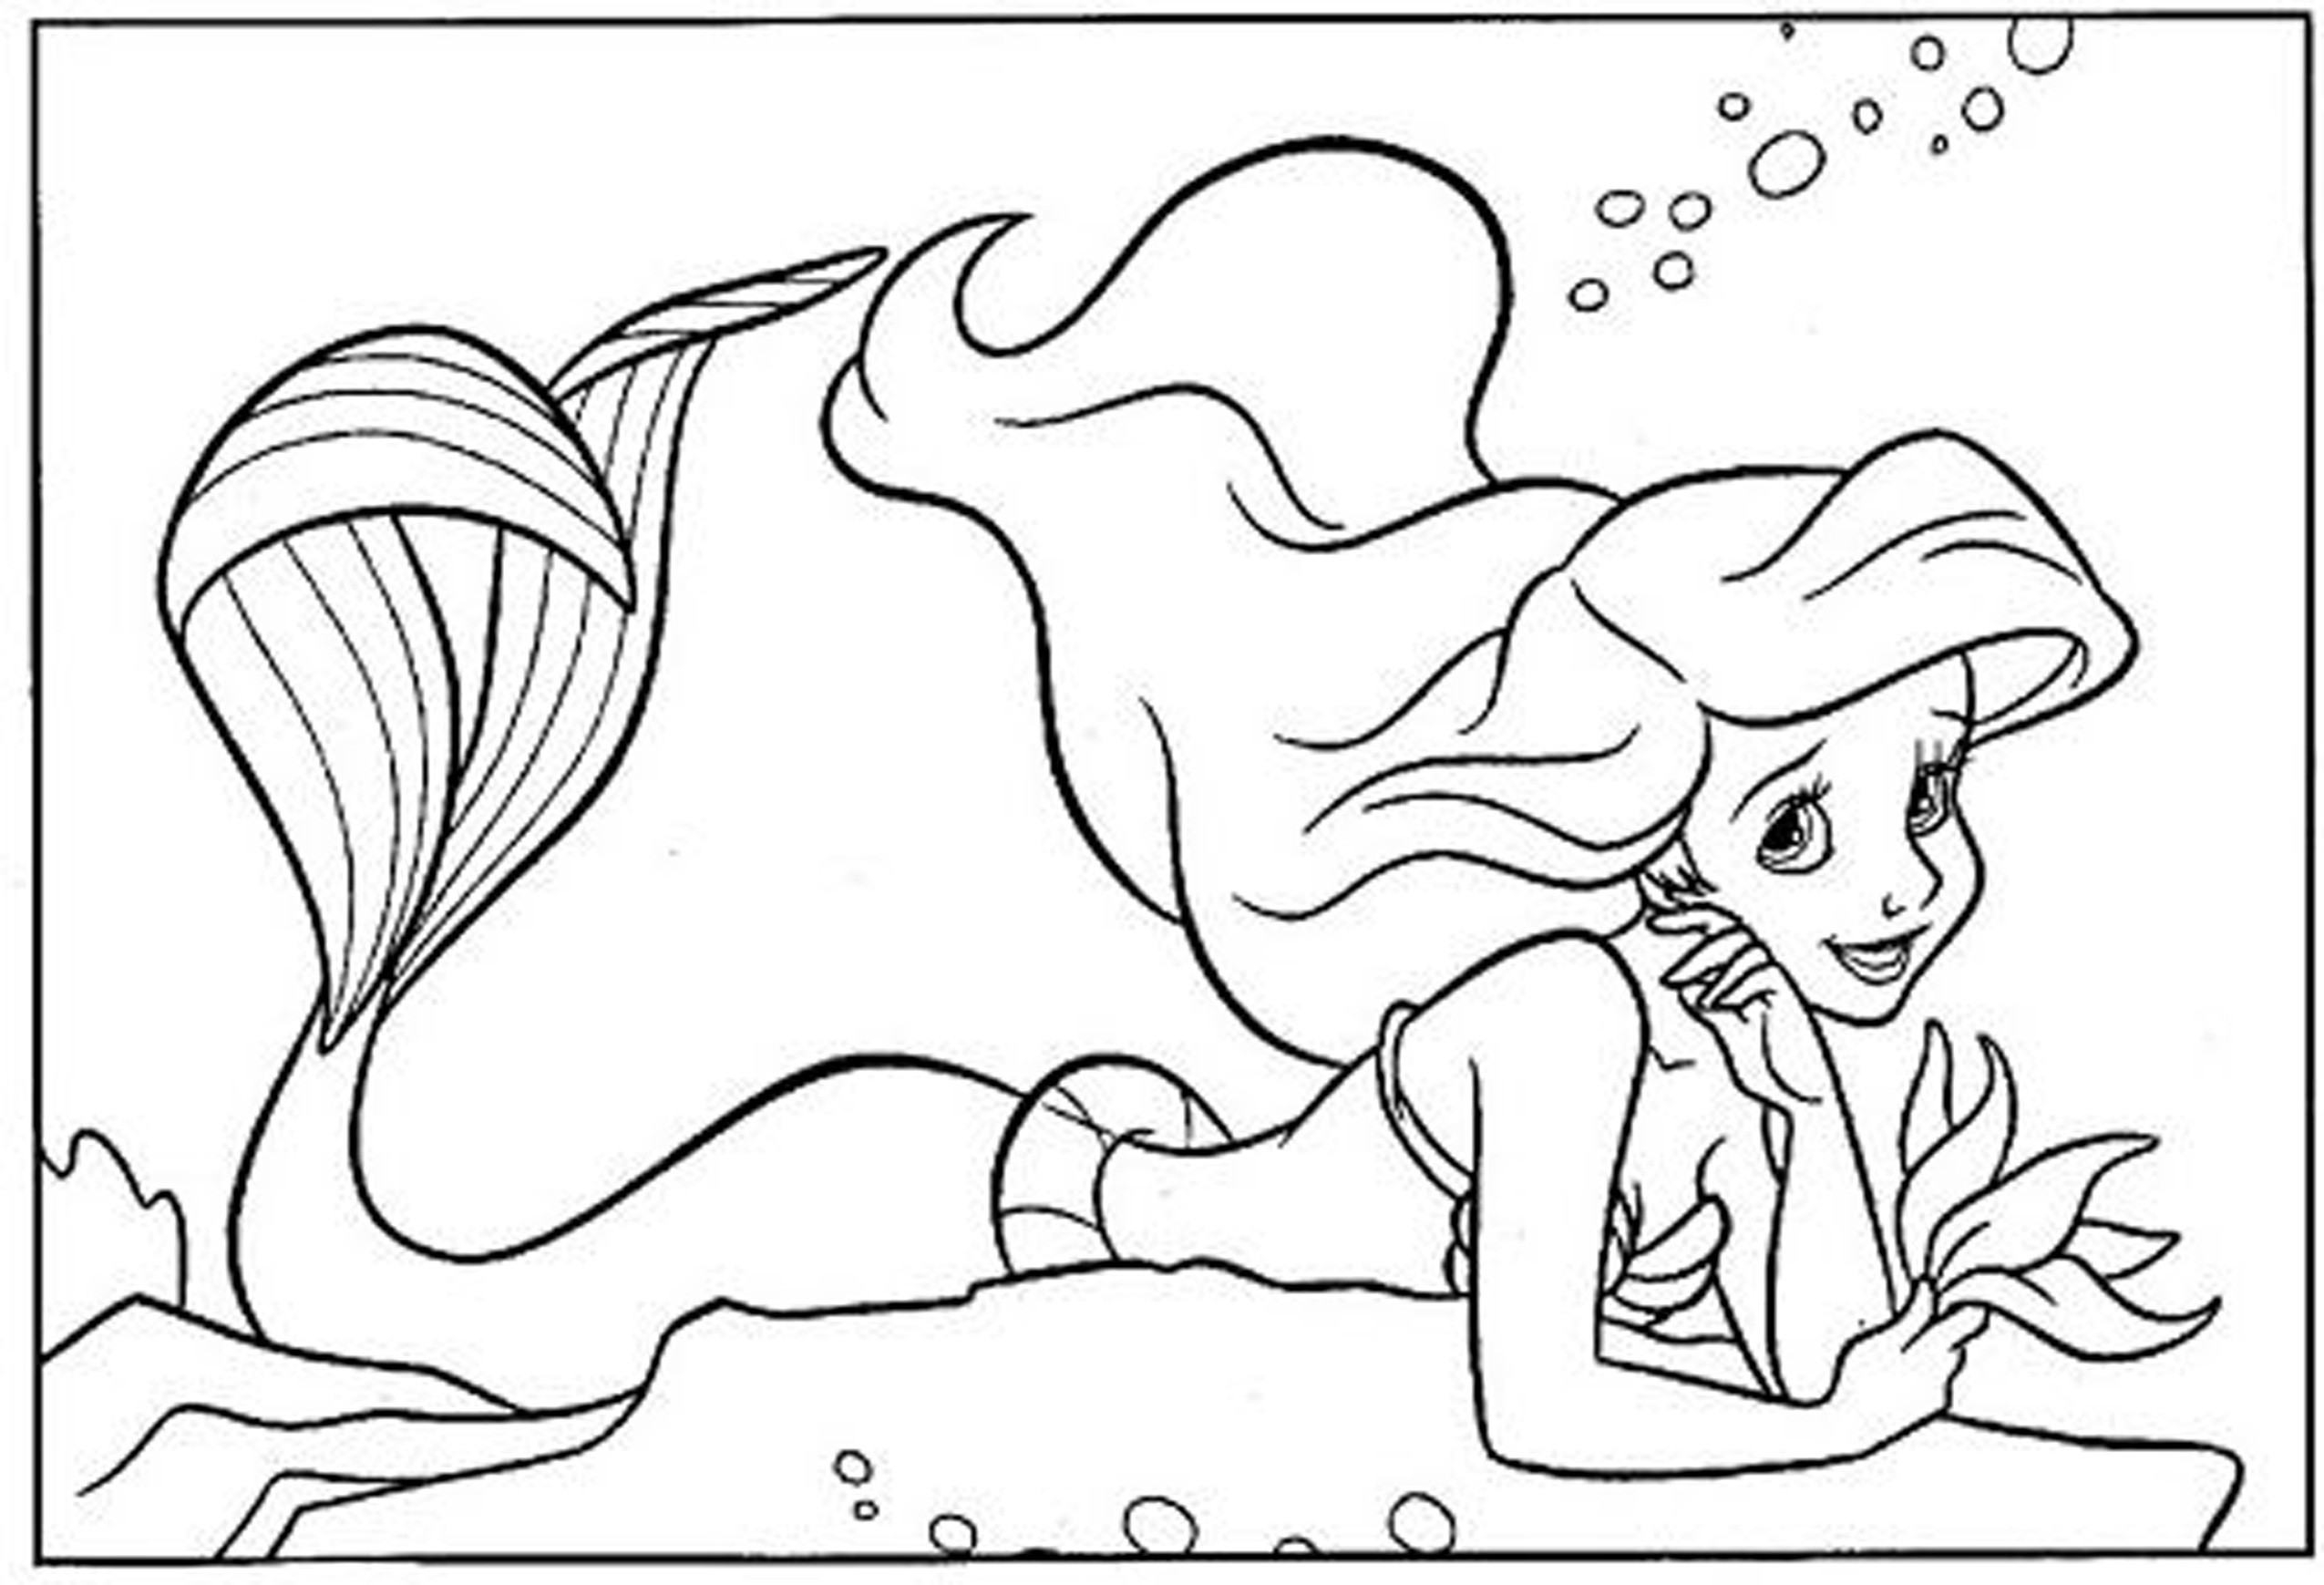 Coloring Sheets For Teenage Girls
 Coloring Pages Coloring Sheets For Teenage Girls Coloring